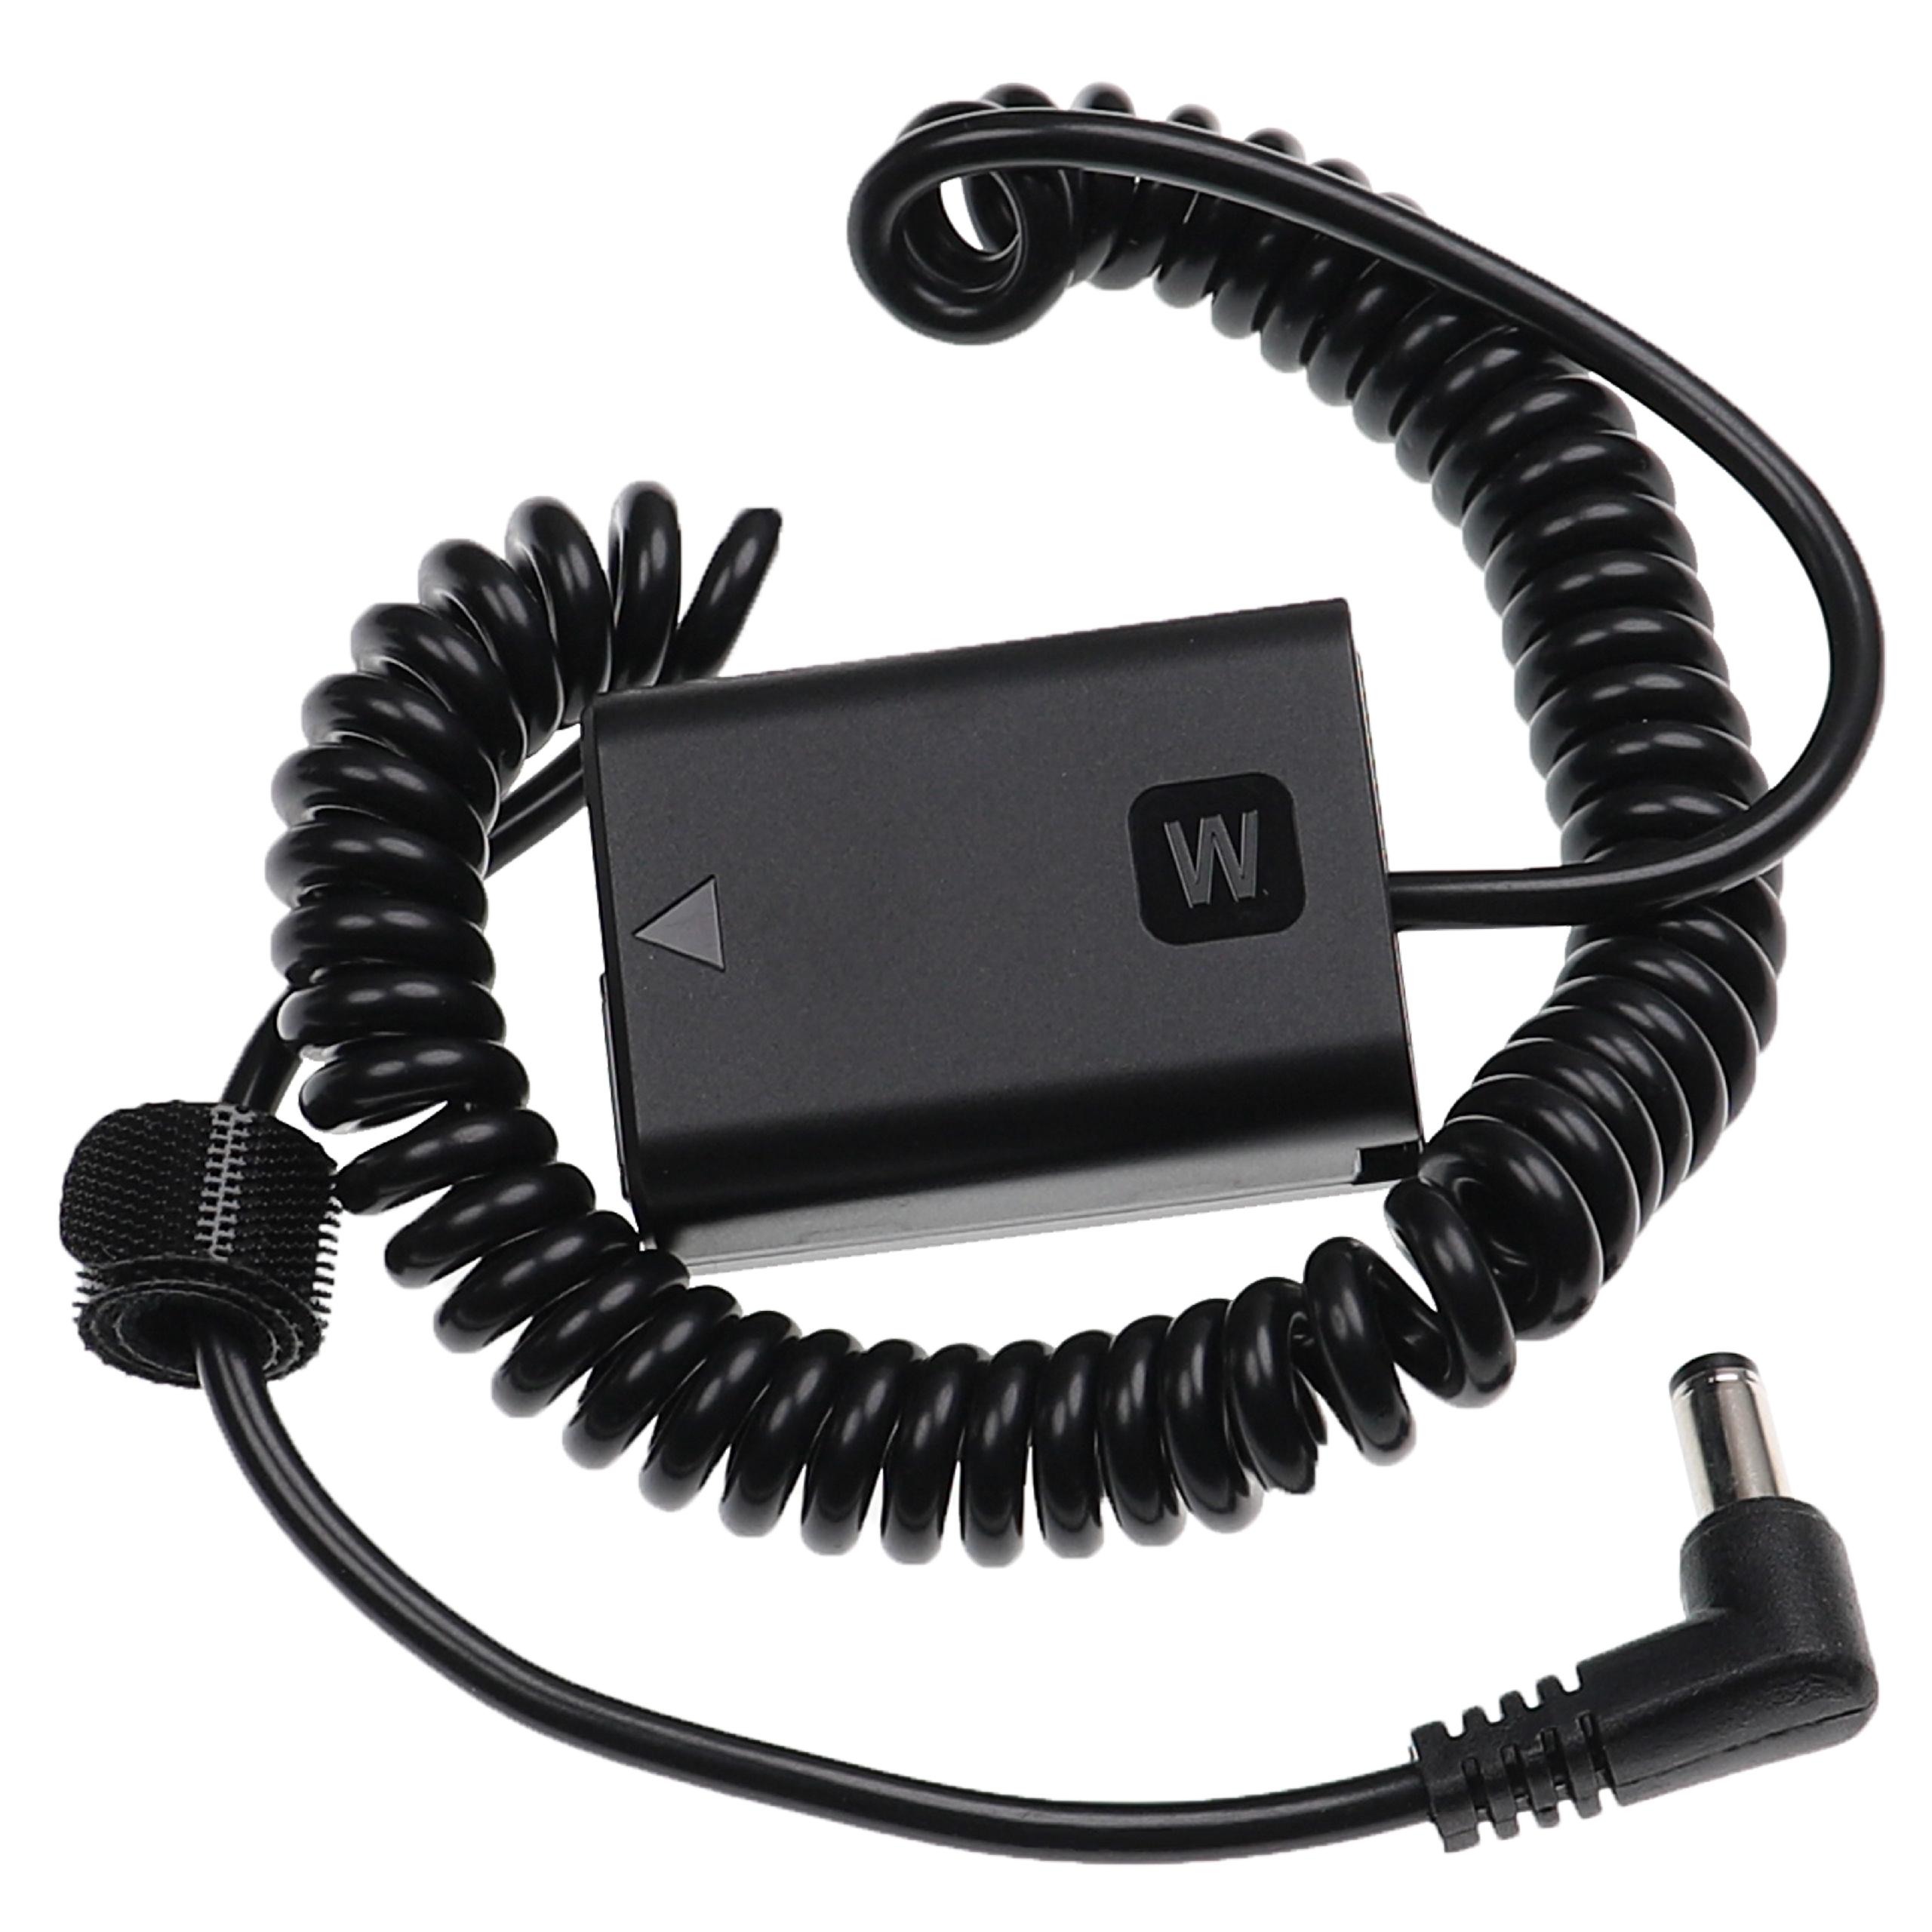 DC Coupler replaces Sony NP-FW50 for SonyCamera - 120 cm long, Spiral Cable